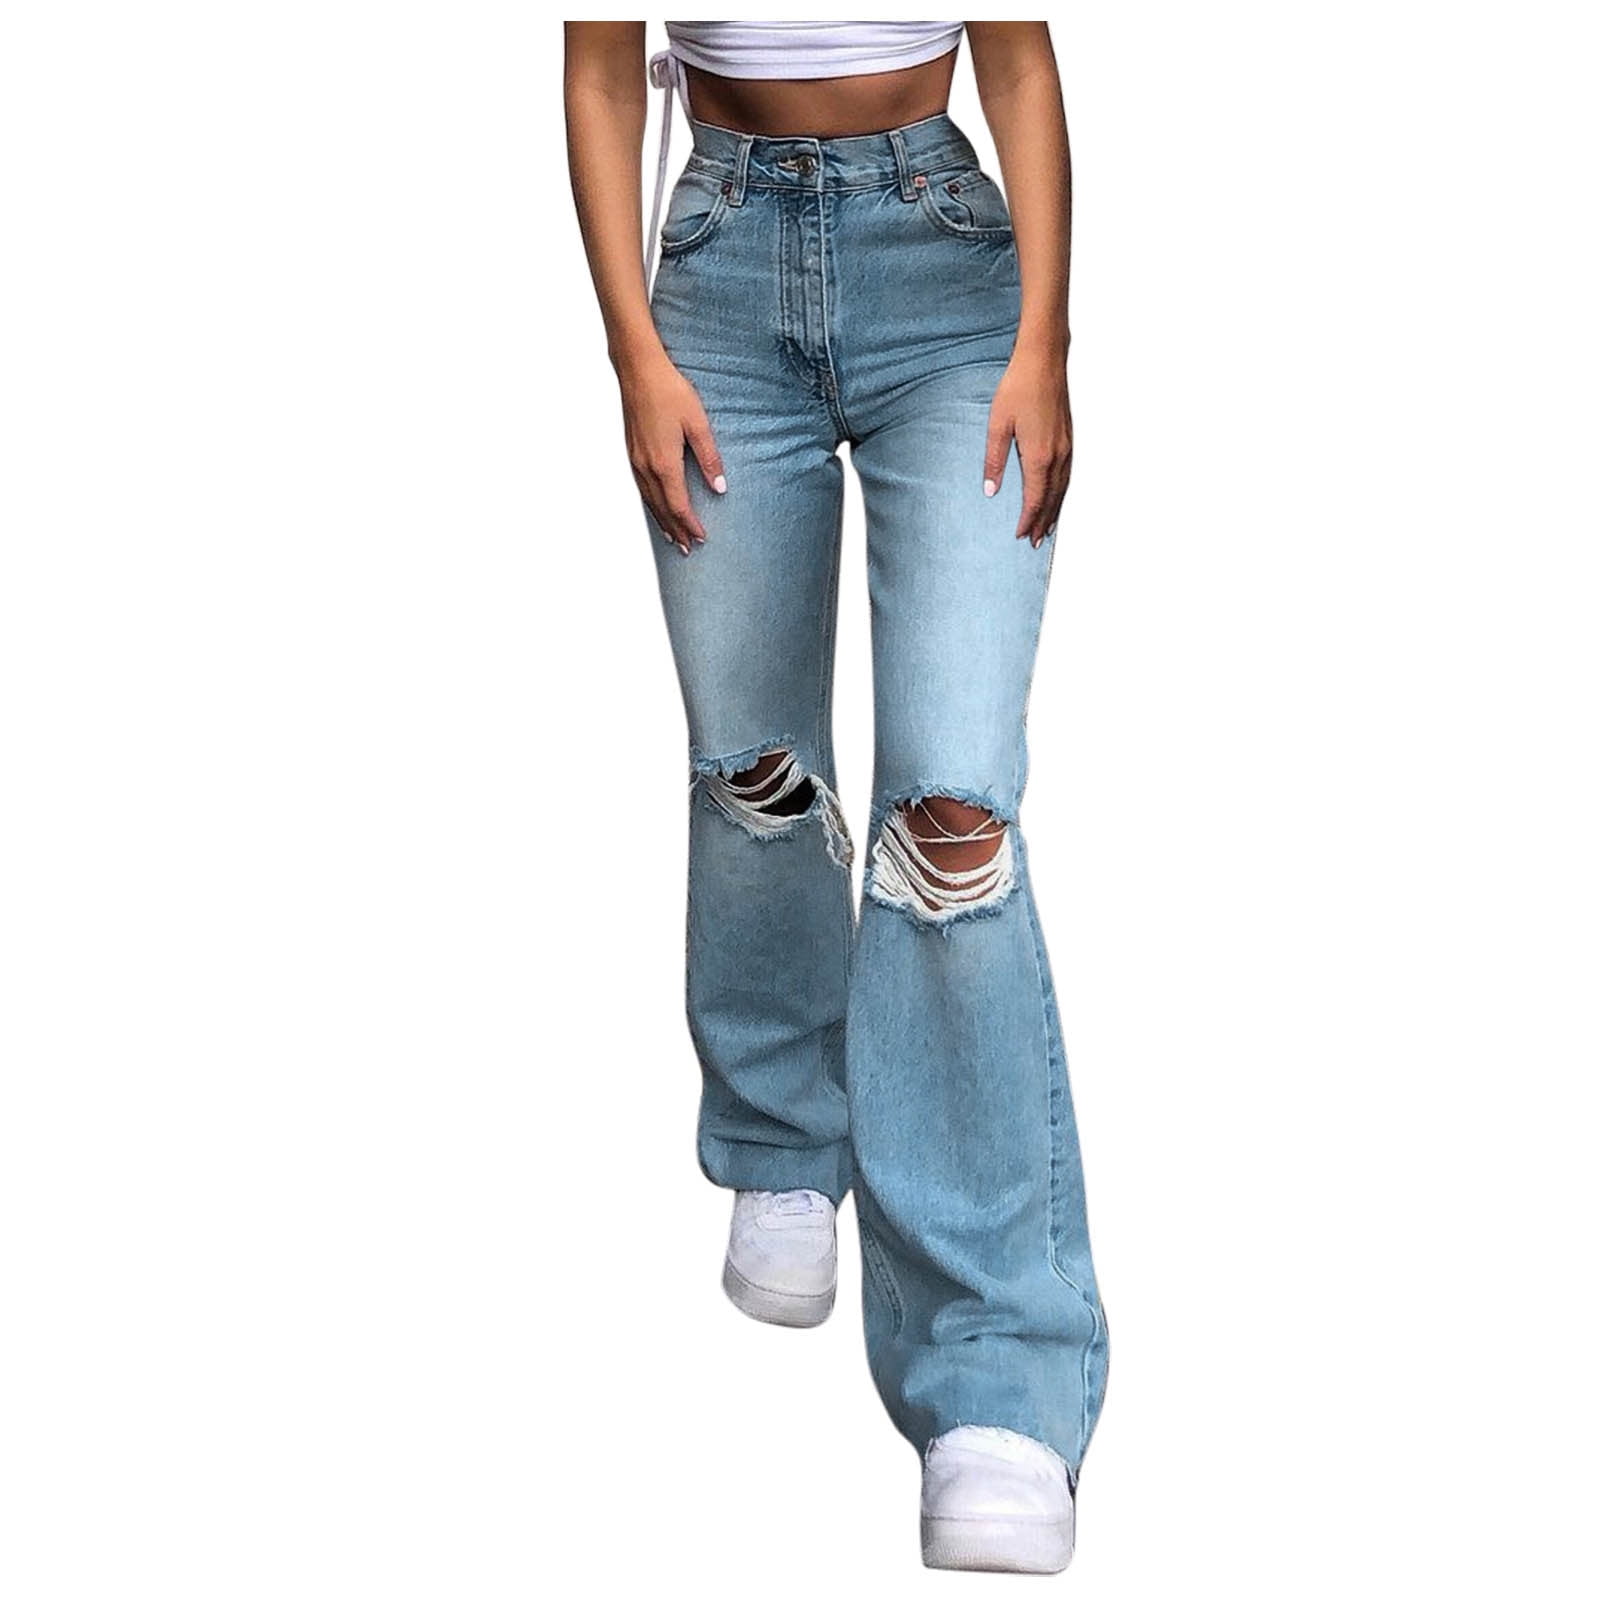 KaLI_store Baggy Jeans Women Stretch Ripped High Waisted Jeans Frayed Raw  Hem Distressed Denim Pants with Hole Light Blue,S 